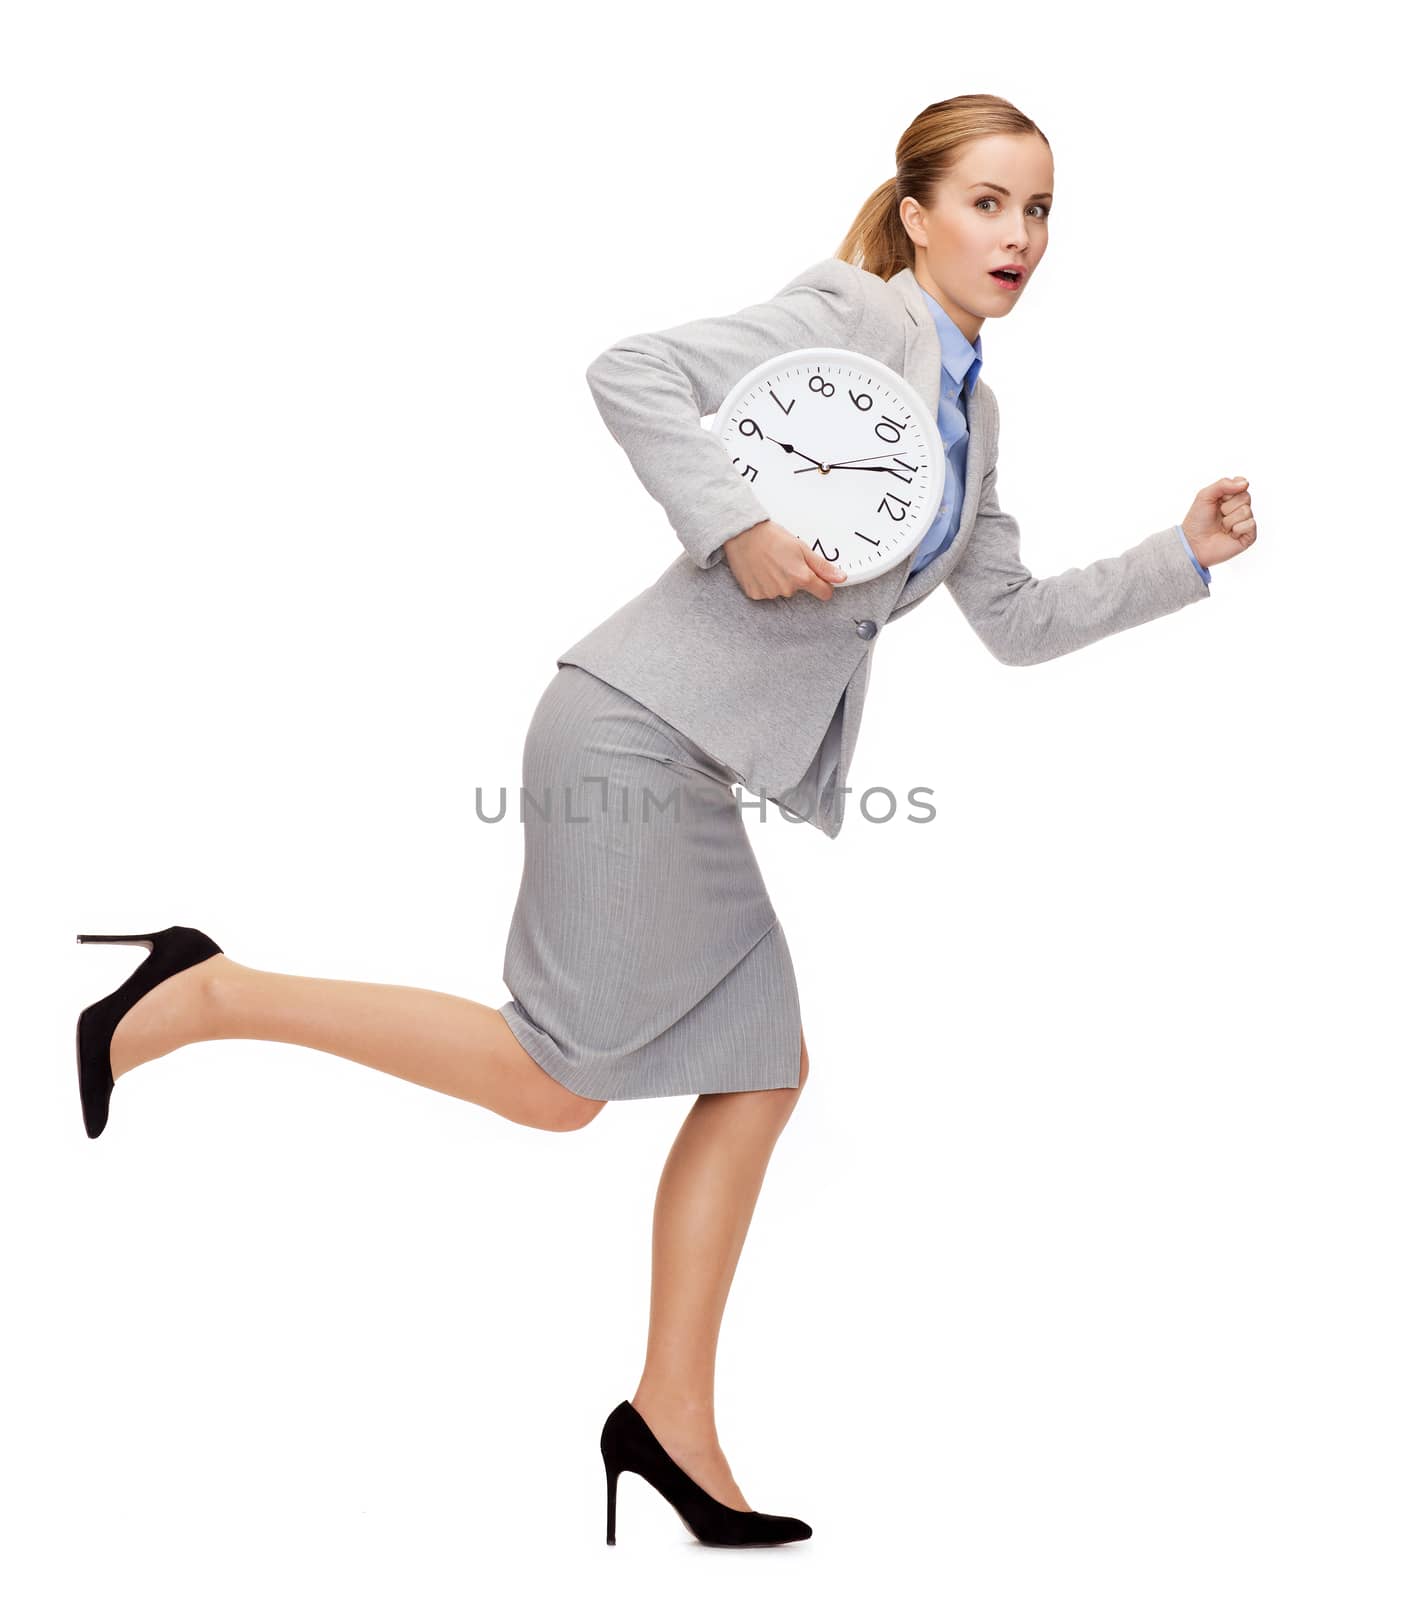 stressed young businesswoman with clock running by dolgachov